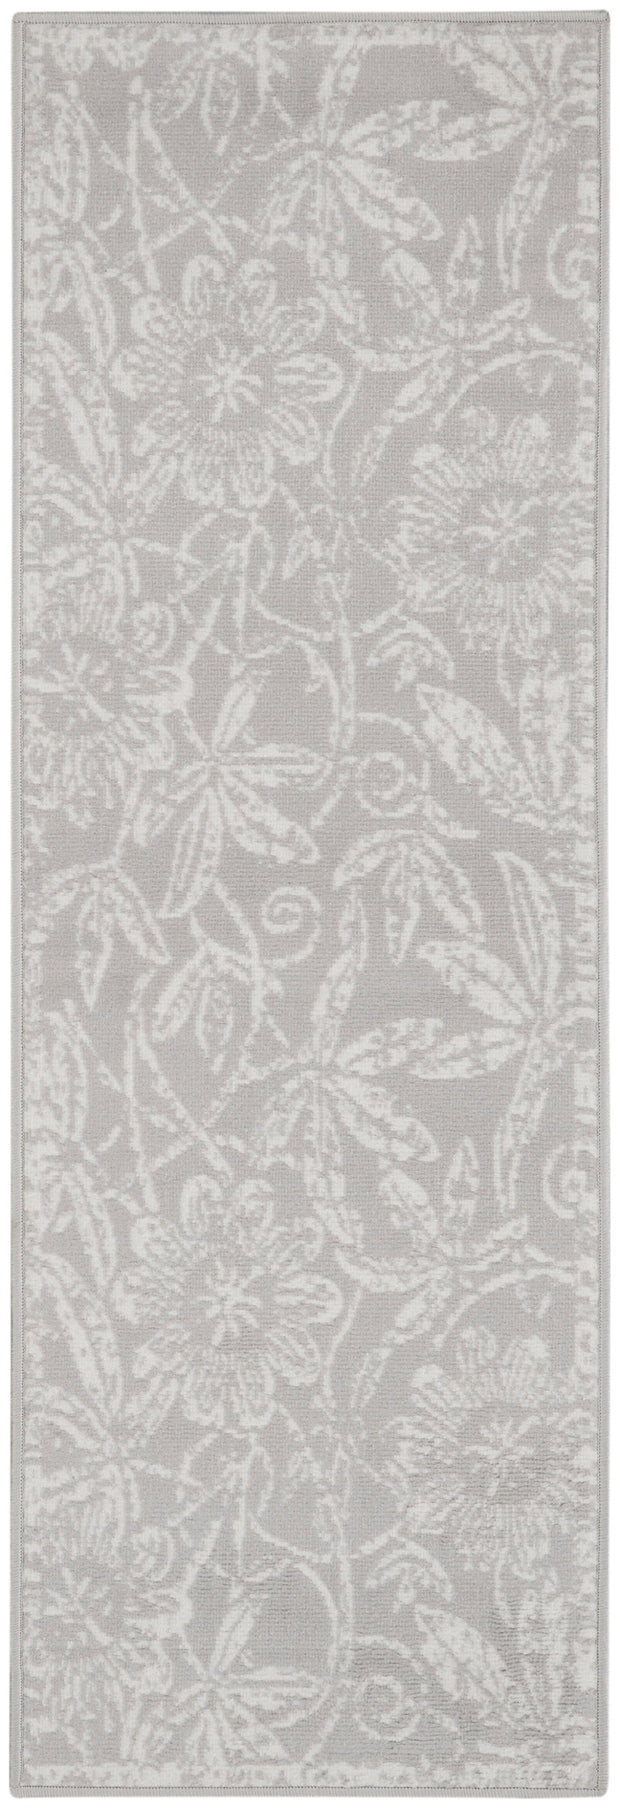 whimsicle grey rug by nourison 99446832016 redo 3